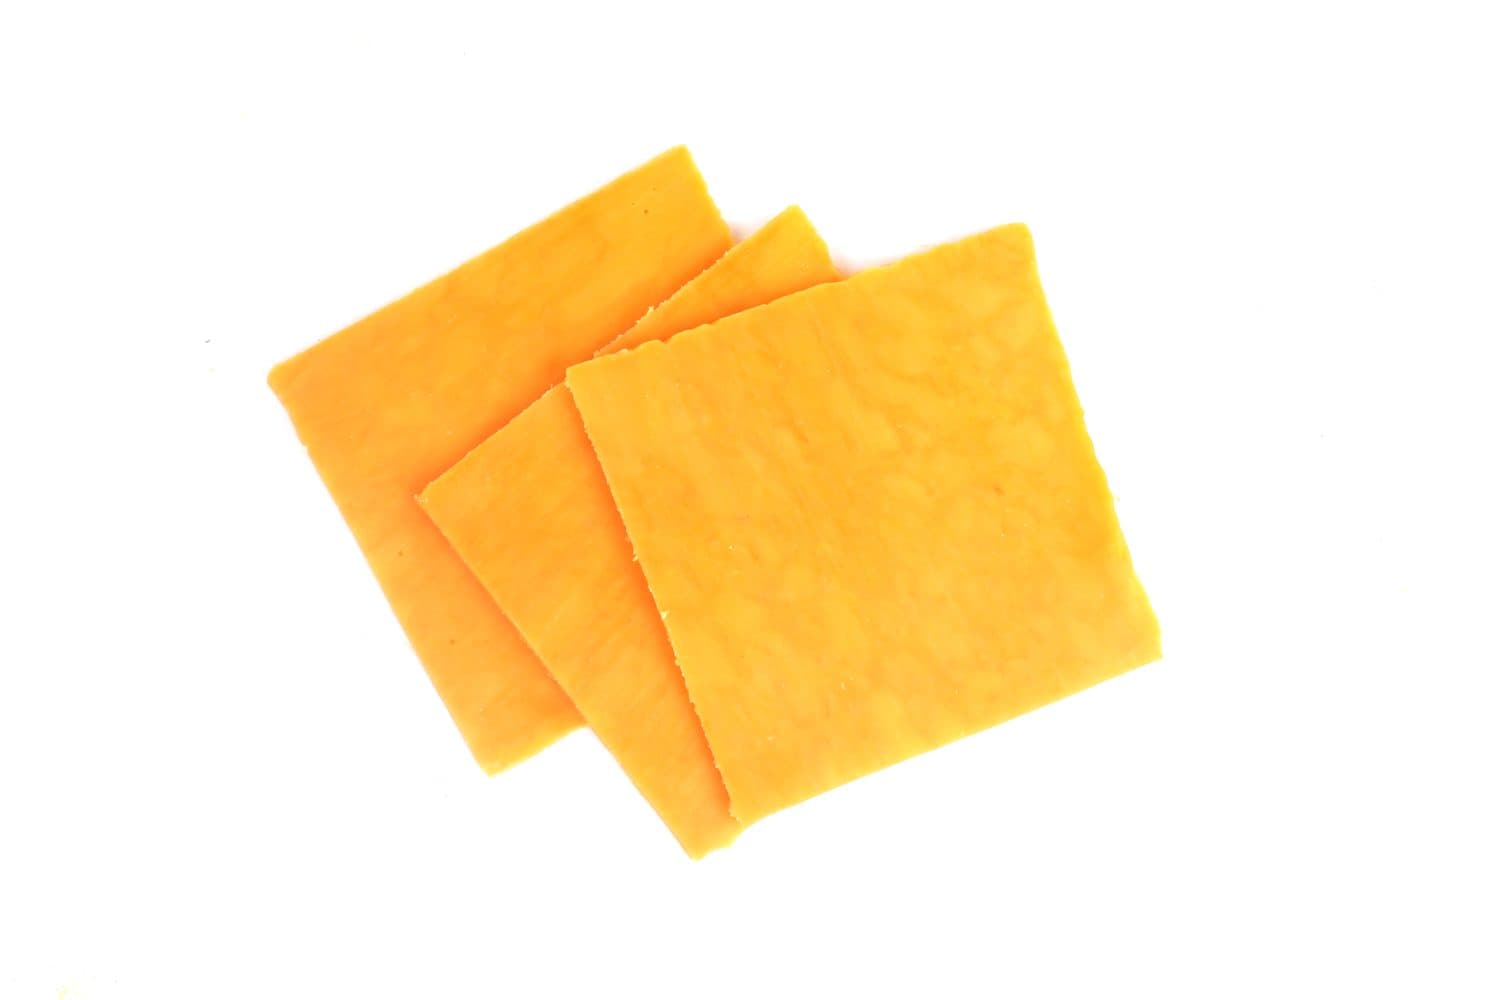 pieces of cheddar cheese on a white background